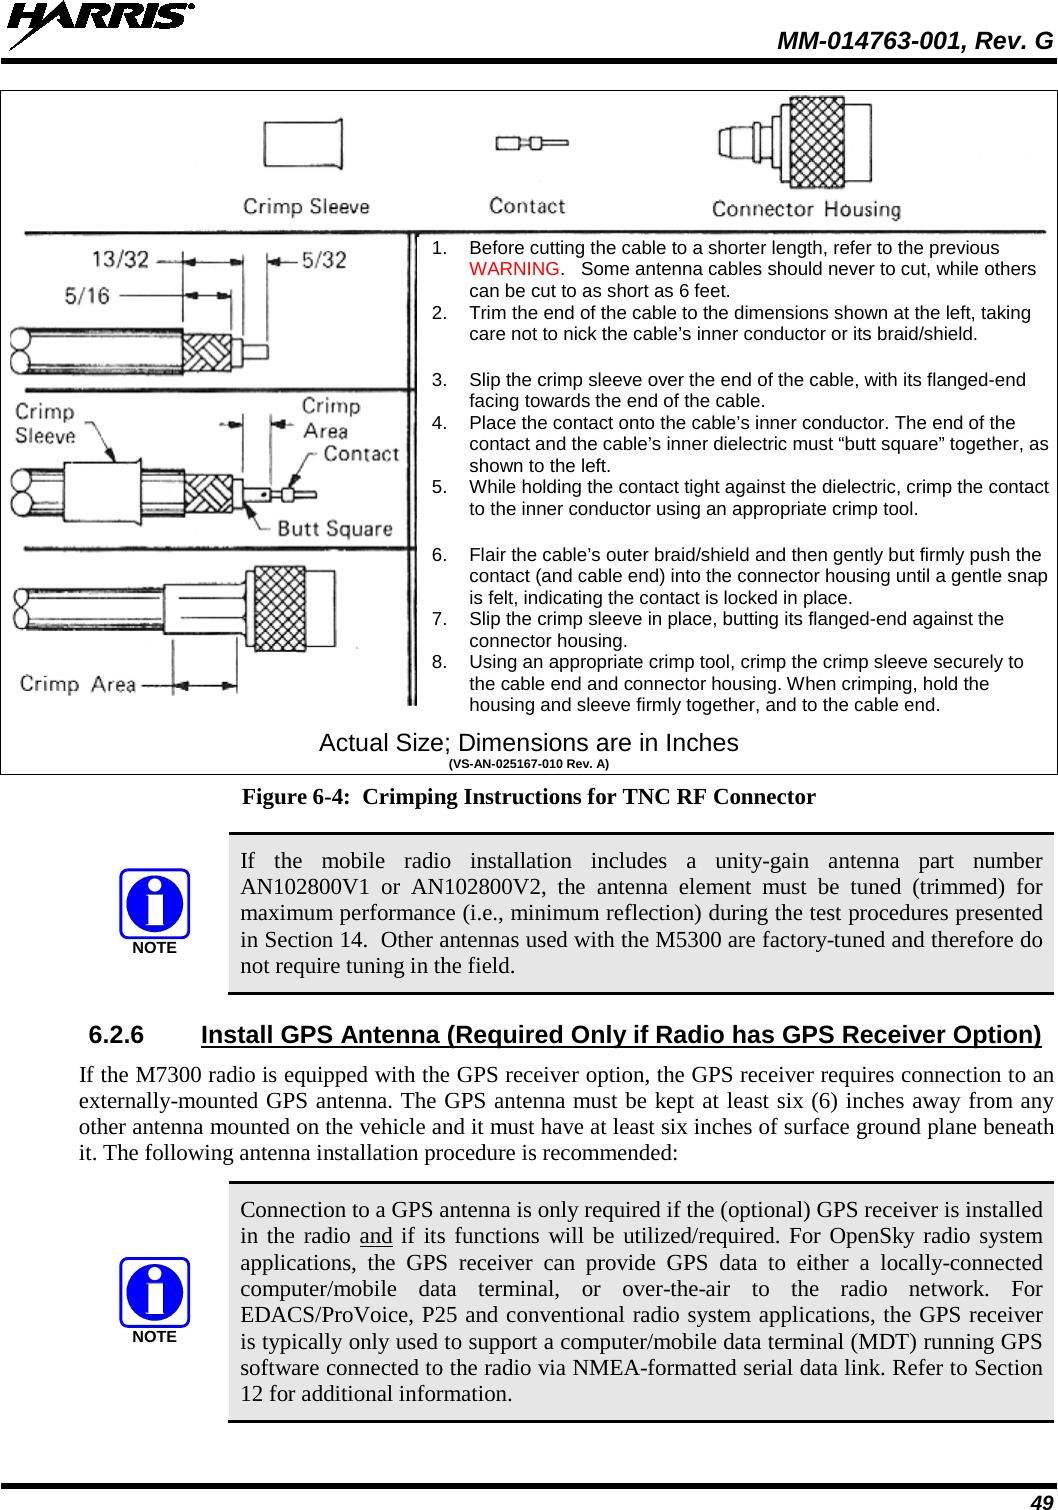  MM-014763-001, Rev. G 49  Actual Size; Dimensions are in Inches (VS-AN-025167-010 Rev. A) Figure 6-4:  Crimping Instructions for TNC RF Connector   If the mobile radio installation includes a unity-gain  antenna part number AN102800V1 or AN102800V2,  the  antenna  element  must be tuned (trimmed)  for maximum performance (i.e., minimum reflection) during the test procedures presented in Section 14.  Other antennas used with the M5300 are factory-tuned and therefore do not require tuning in the field. 6.2.6 Install GPS Antenna (Required Only if Radio has GPS Receiver Option) If the M7300 radio is equipped with the GPS receiver option, the GPS receiver requires connection to an externally-mounted GPS antenna. The GPS antenna must be kept at least six (6) inches away from any other antenna mounted on the vehicle and it must have at least six inches of surface ground plane beneath it. The following antenna installation procedure is recommended:   Connection to a GPS antenna is only required if the (optional) GPS receiver is installed in the radio and if its functions will be utilized/required. For OpenSky radio system applications,  the  GPS  receiver can provide GPS data to either a locally-connected computer/mobile  data  terminal,  or over-the-air to the radio  network. For EDACS/ProVoice, P25 and conventional radio system applications, the GPS receiver is typically only used to support a computer/mobile data terminal (MDT) running GPS software connected to the radio via NMEA-formatted serial data link. Refer to Section 12 for additional information. NOTENOTE1. Before cutting the cable to a shorter length, refer to the previous WARNING.   Some antenna cables should never to cut, while others can be cut to as short as 6 feet. 2. Trim the end of the cable to the dimensions shown at the left, taking care not to nick the cable’s inner conductor or its braid/shield.  3. Slip the crimp sleeve over the end of the cable, with its flanged-end facing towards the end of the cable. 4. Place the contact onto the cable’s inner conductor. The end of the contact and the cable’s inner dielectric must “butt square” together, as shown to the left. 5. While holding the contact tight against the dielectric, crimp the contact to the inner conductor using an appropriate crimp tool.  6. Flair the cable’s outer braid/shield and then gently but firmly push the contact (and cable end) into the connector housing until a gentle snap is felt, indicating the contact is locked in place. 7. Slip the crimp sleeve in place, butting its flanged-end against the connector housing. 8. Using an appropriate crimp tool, crimp the crimp sleeve securely to the cable end and connector housing. When crimping, hold the housing and sleeve firmly together, and to the cable end. 